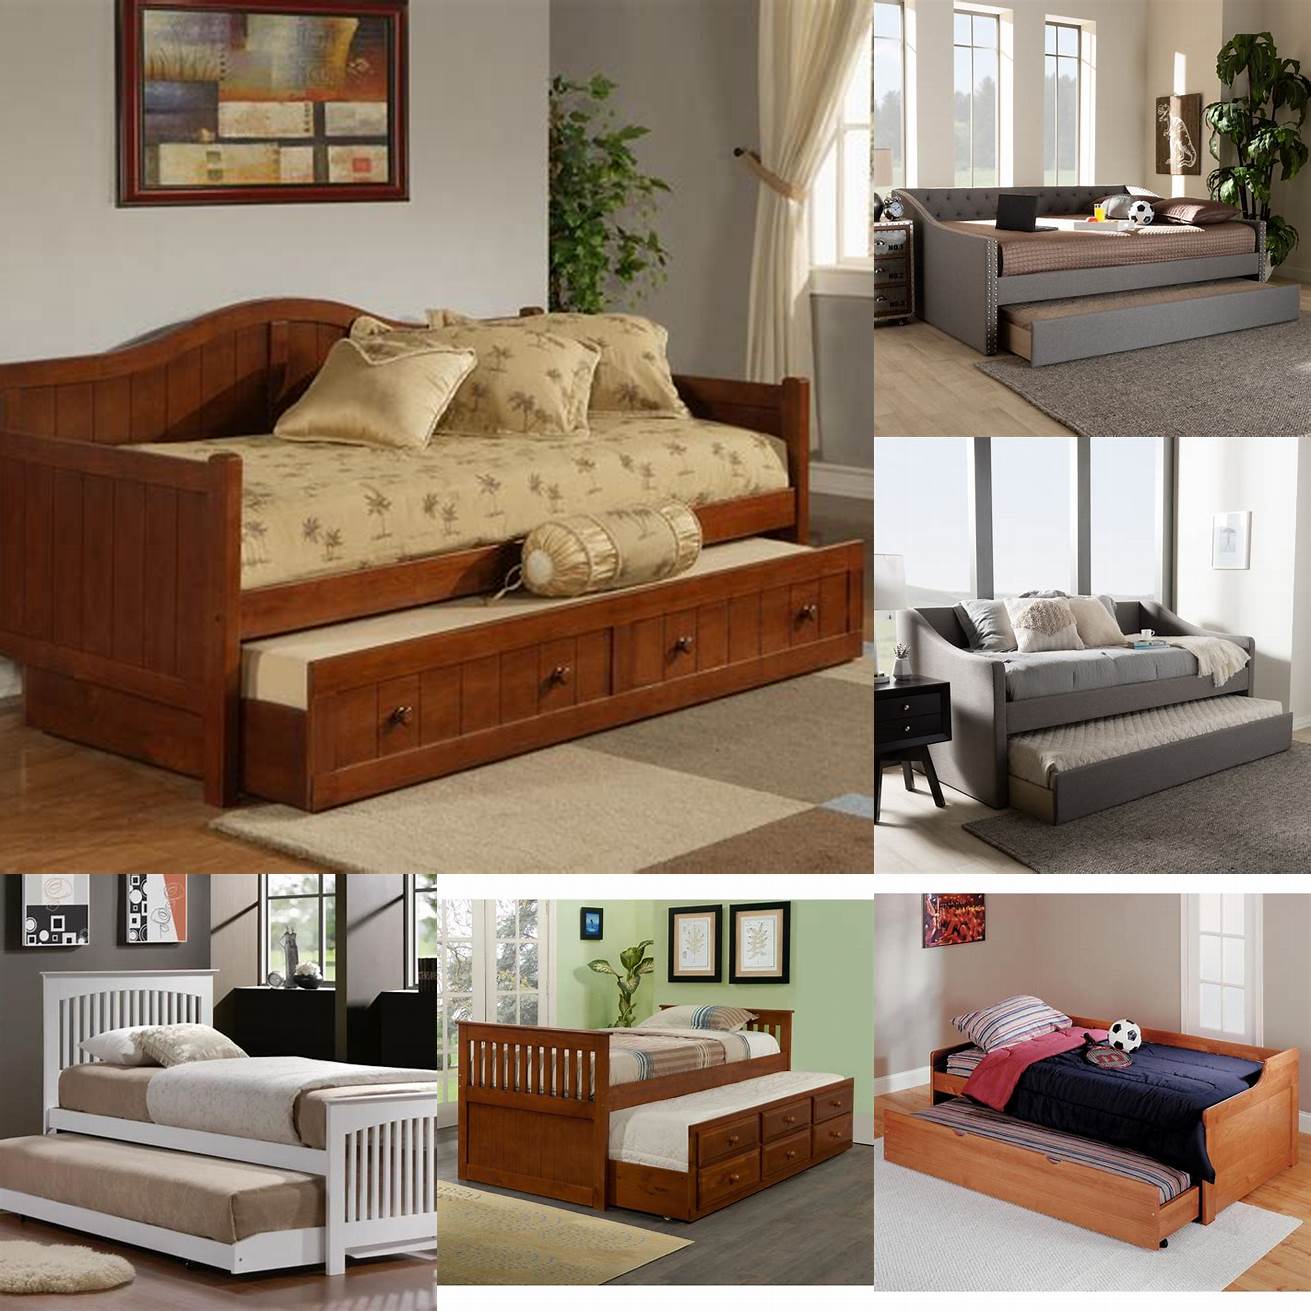 Trundle beds